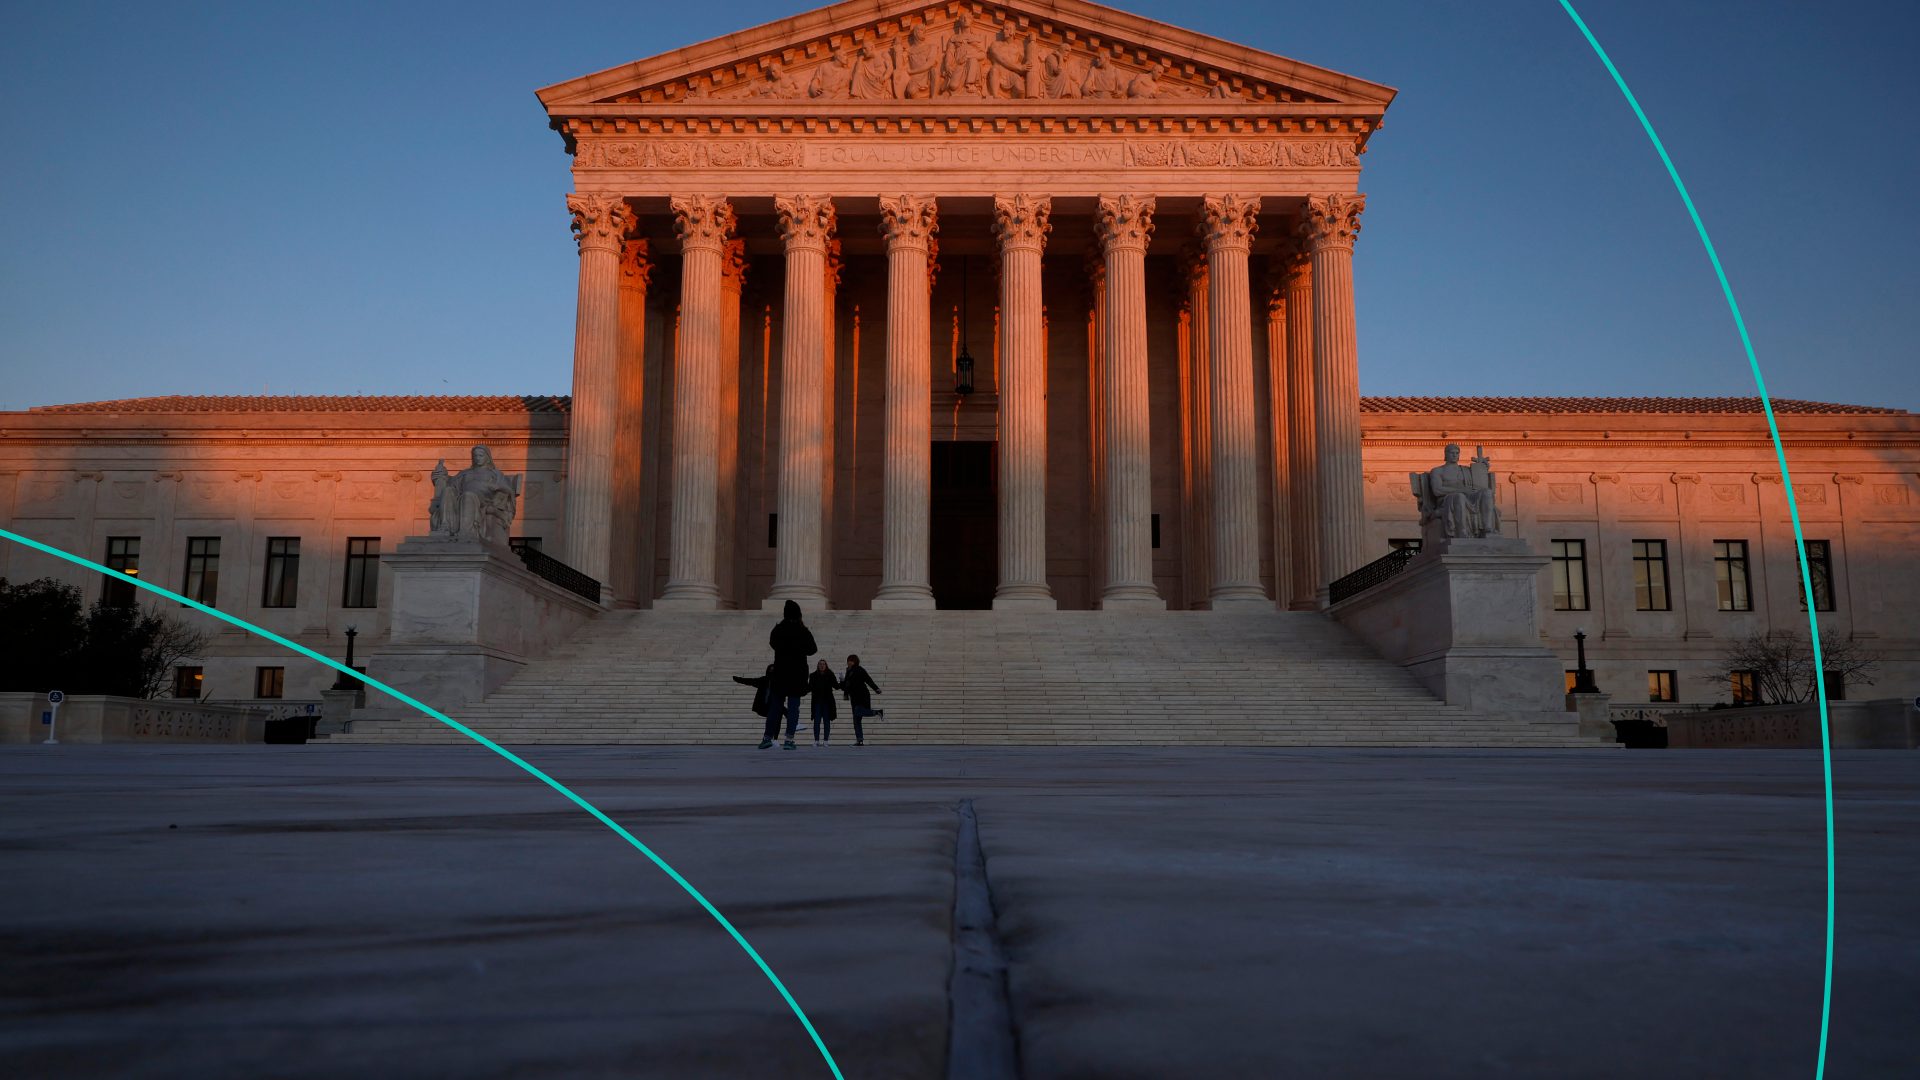  The U.S. Supreme Court building on the day it was reported that Associate Justice Stephen Breyer would soon retire